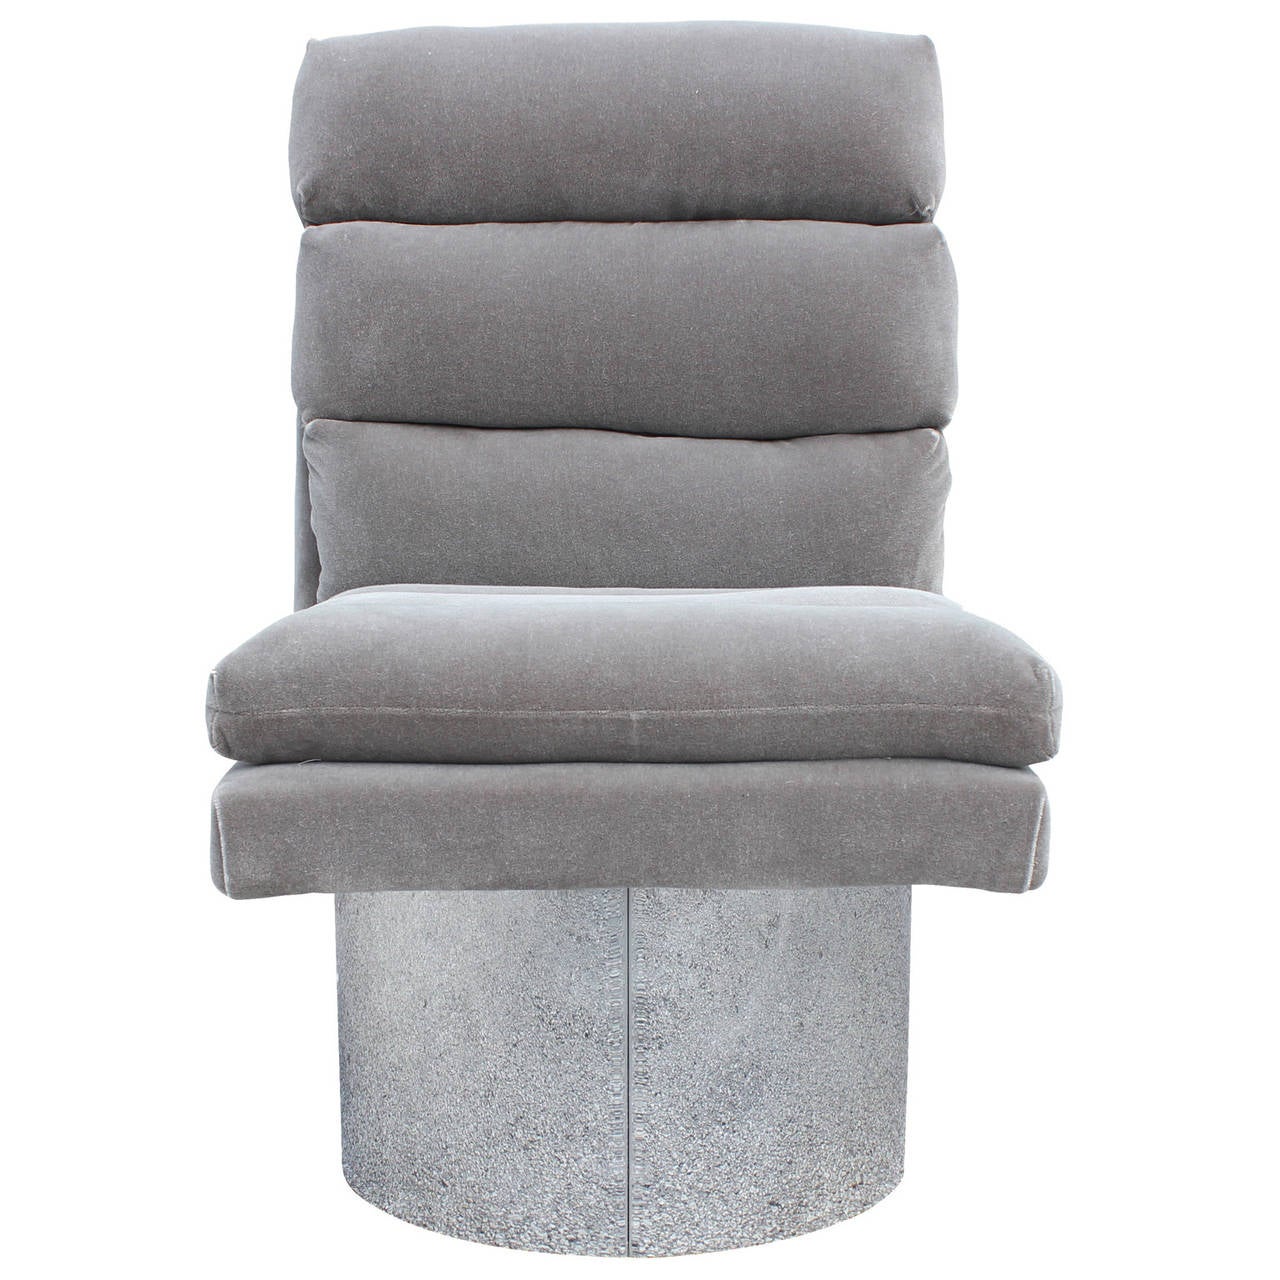 Pair of swivel lounge chairs on shiny chrome cylindrical bases. Freshly upholstered in grey mohair velvet. Chair swivels side to side but always snaps back to center. Great statement pieces. Inquire for an additional two chairs! In the Style of Paul